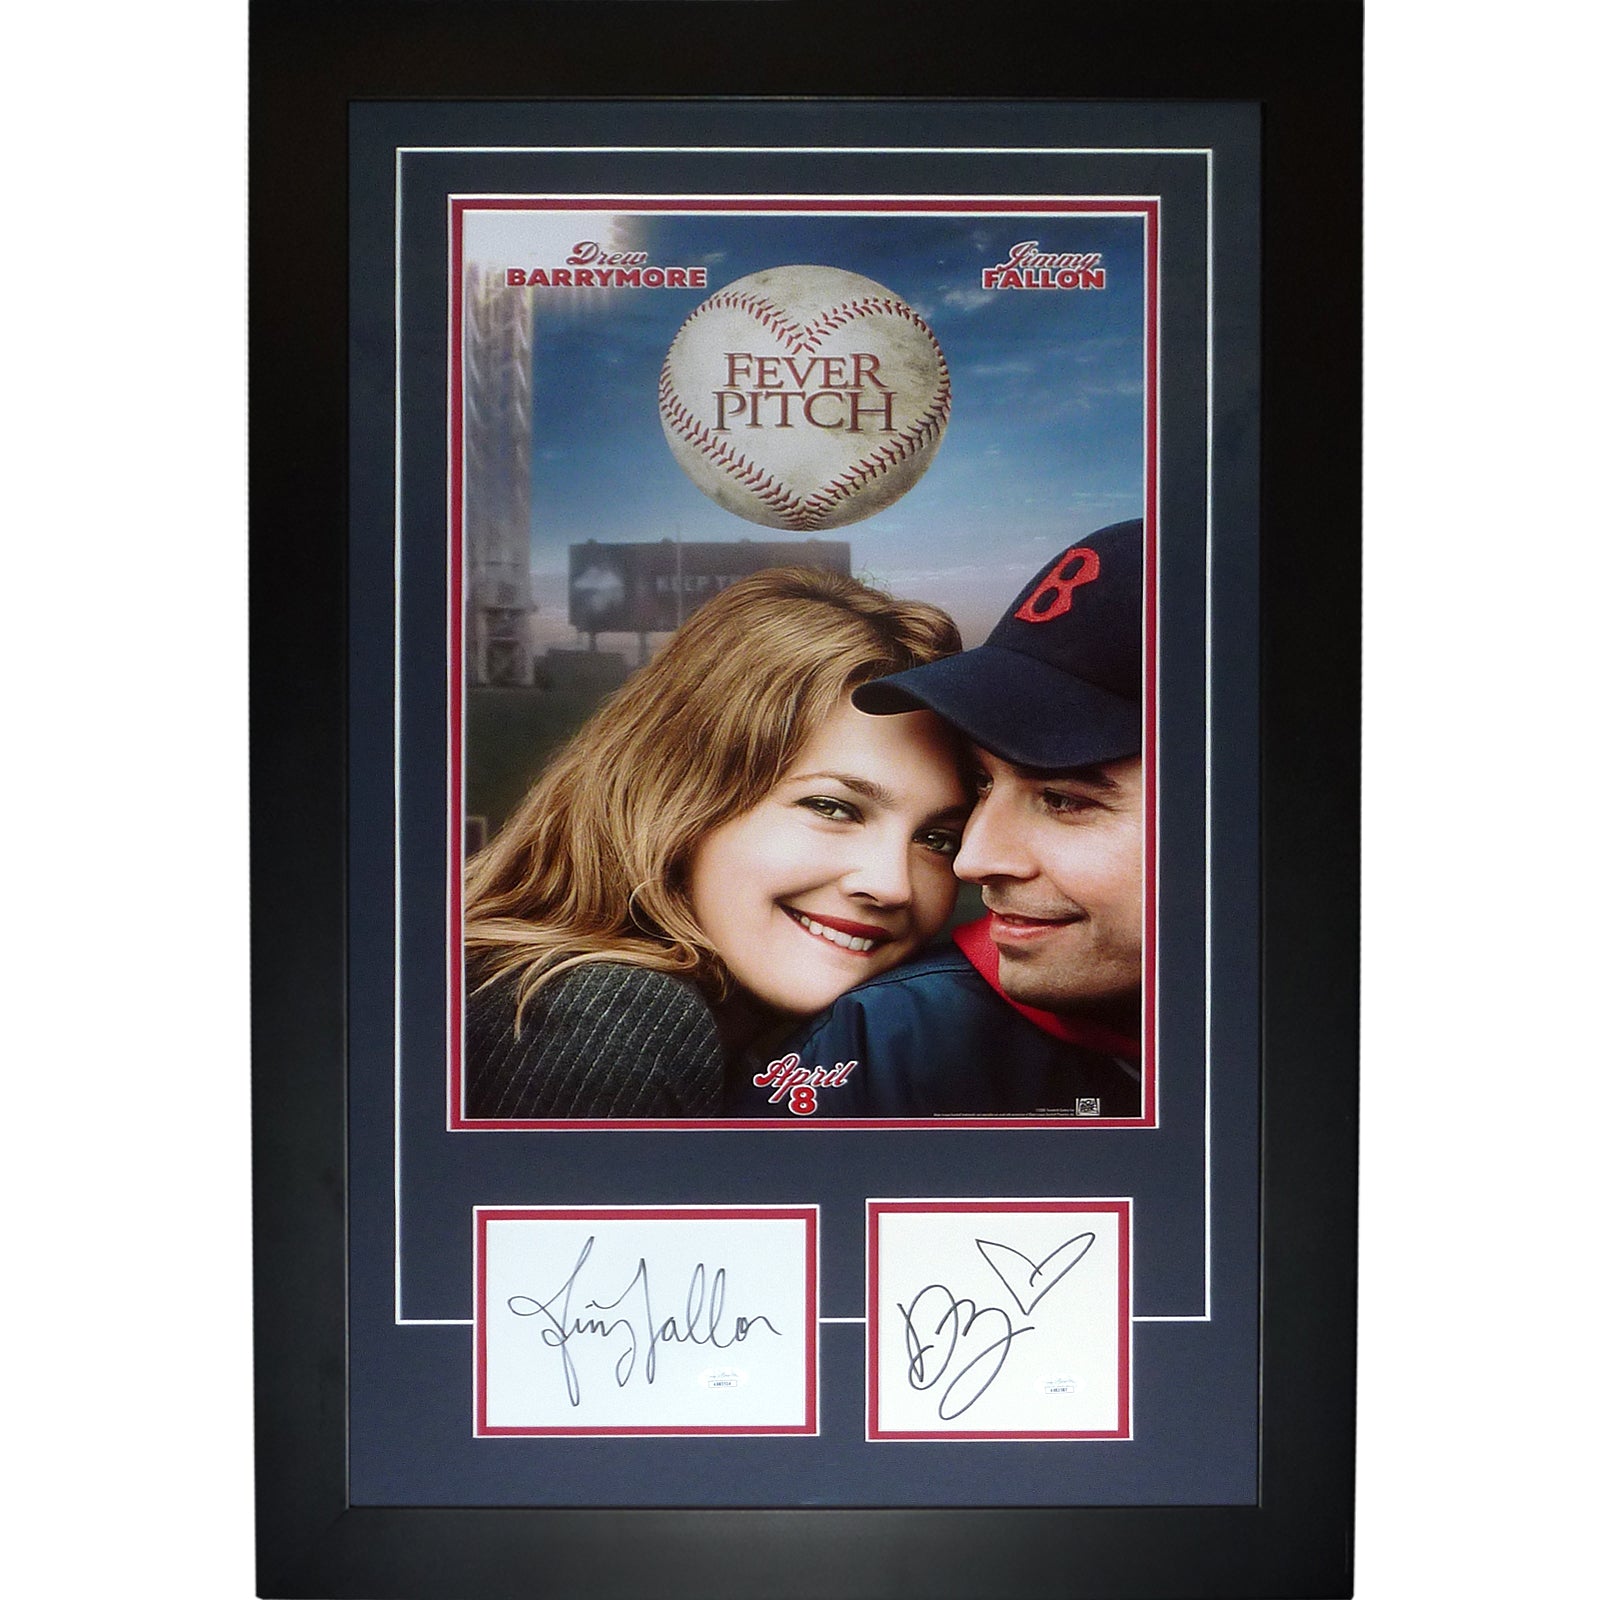 Fever Pitch 11x17 Movie Poster Deluxe Framed with Drew Barrymore And Jimmy Fallon Autographs - JSA